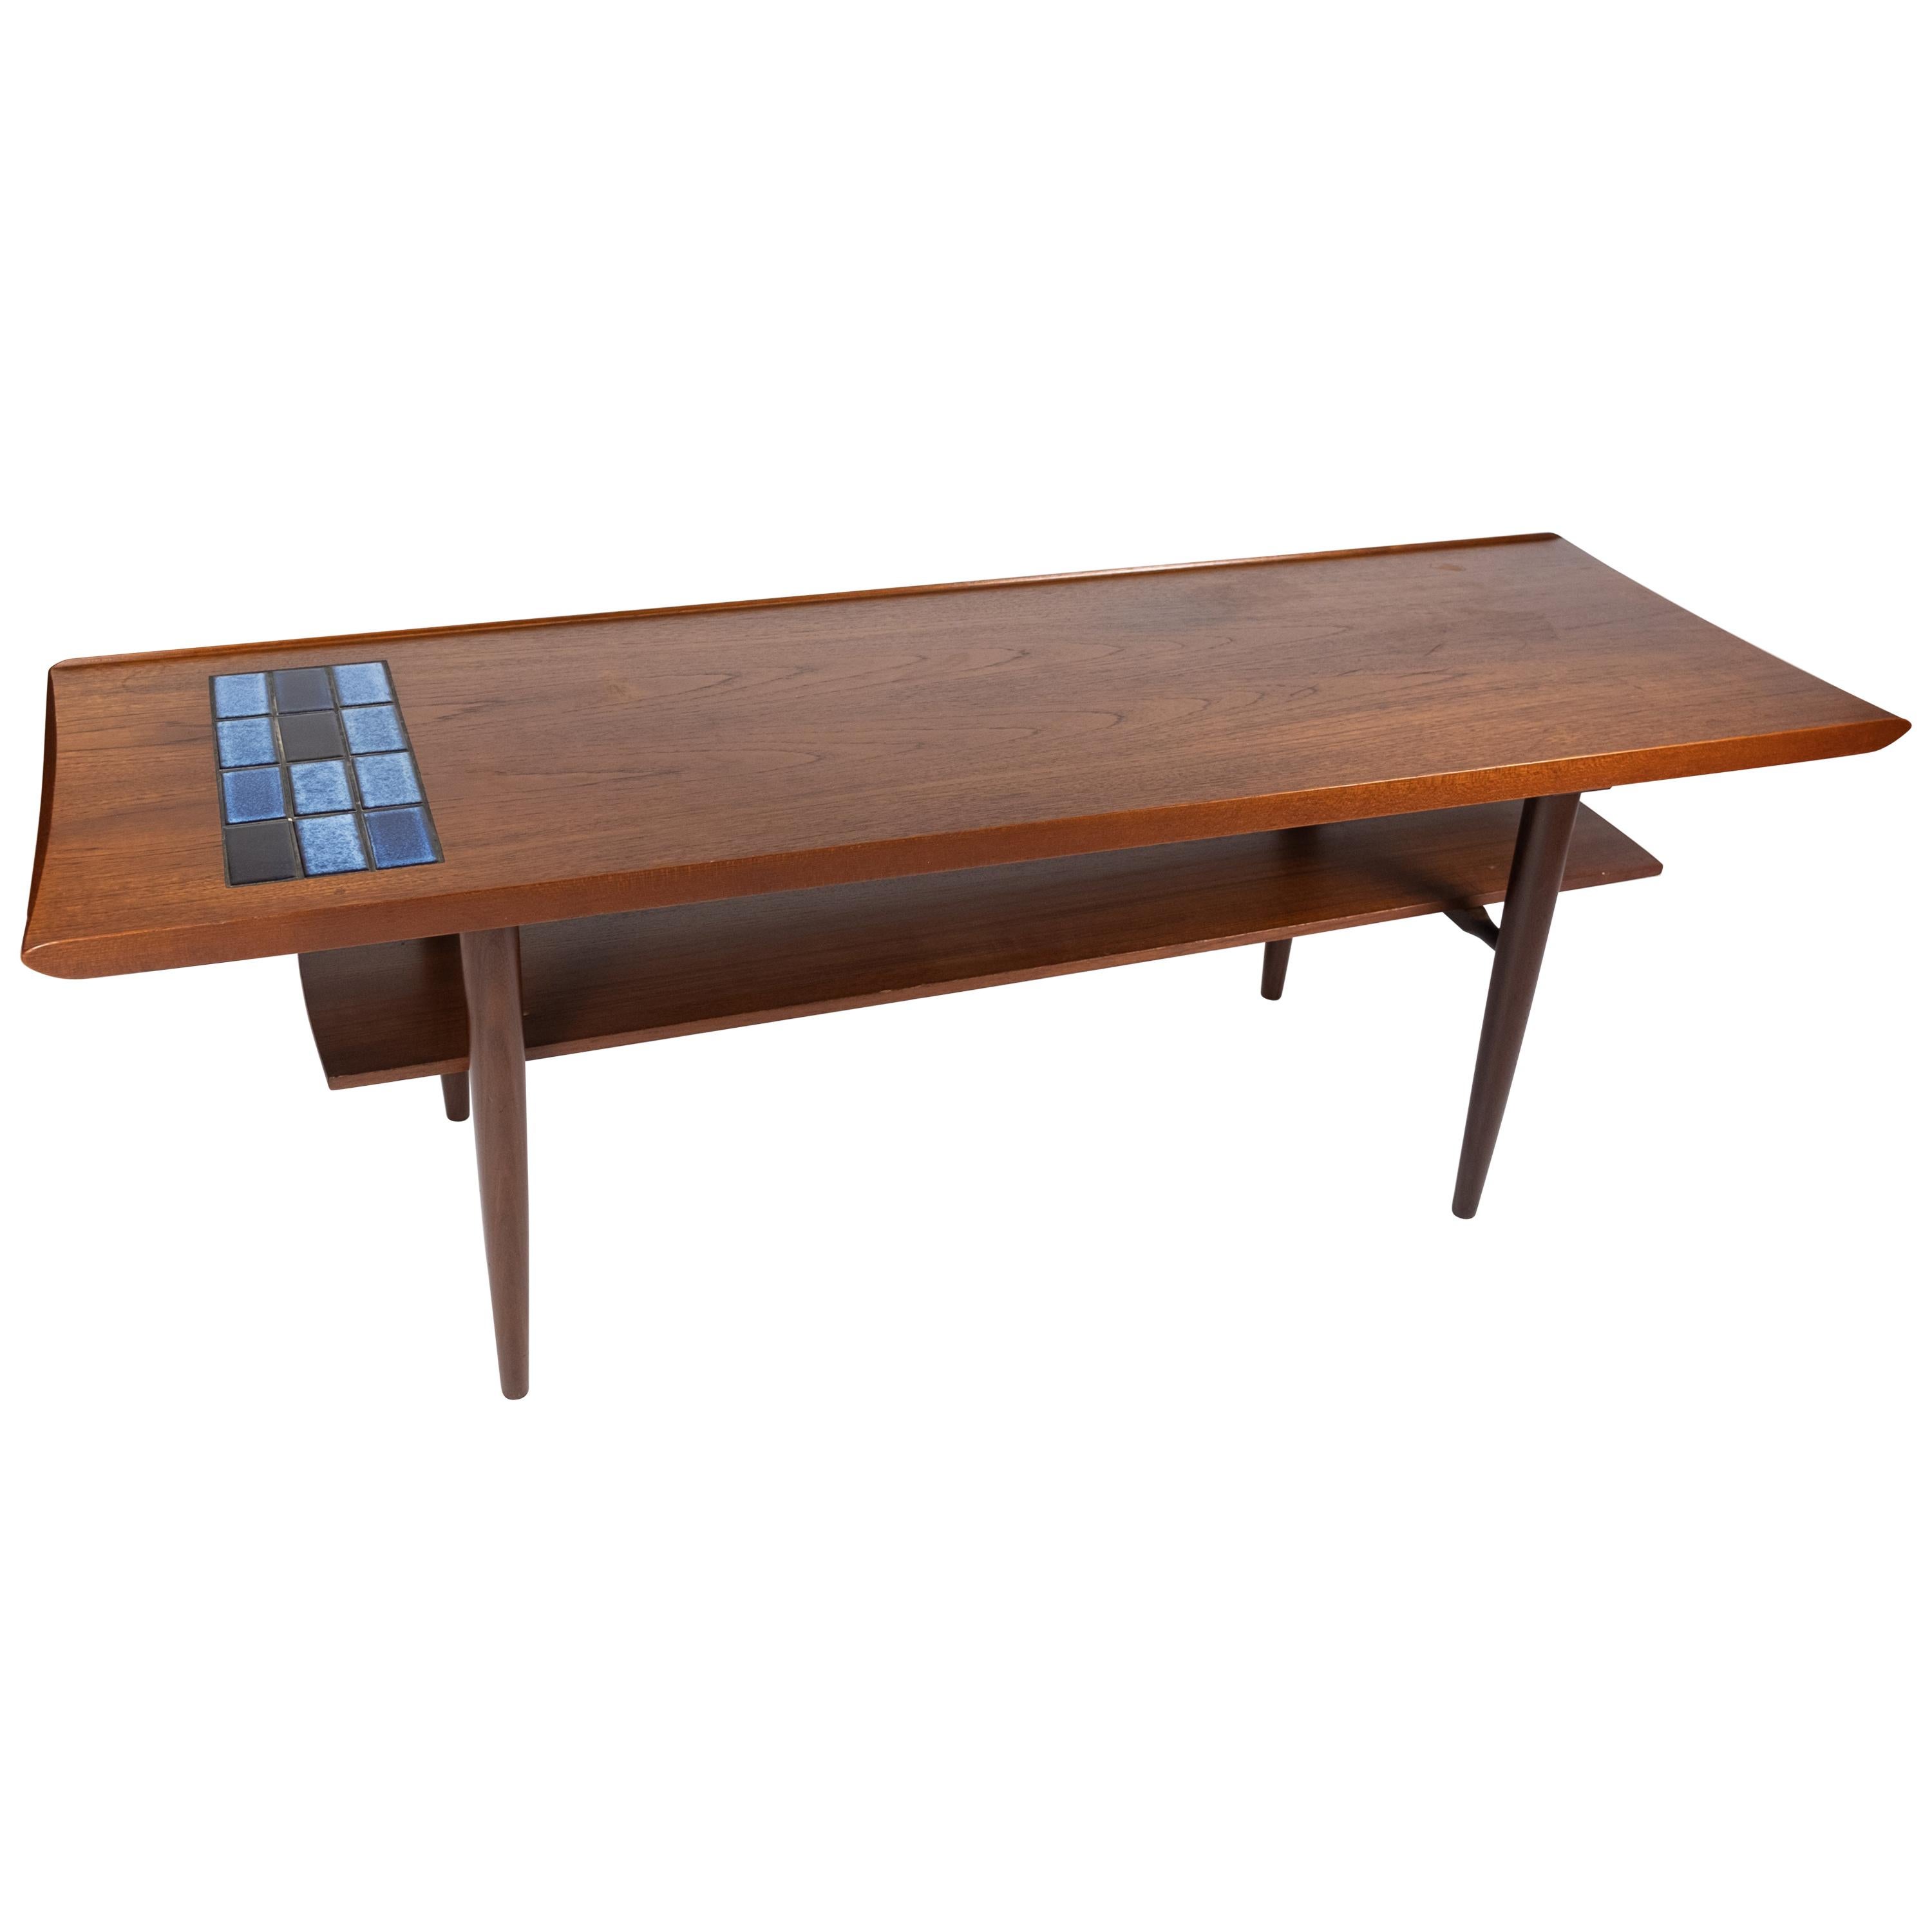 Coffee Table in Teak with Blue Tiles of Danish Design from the 1960s